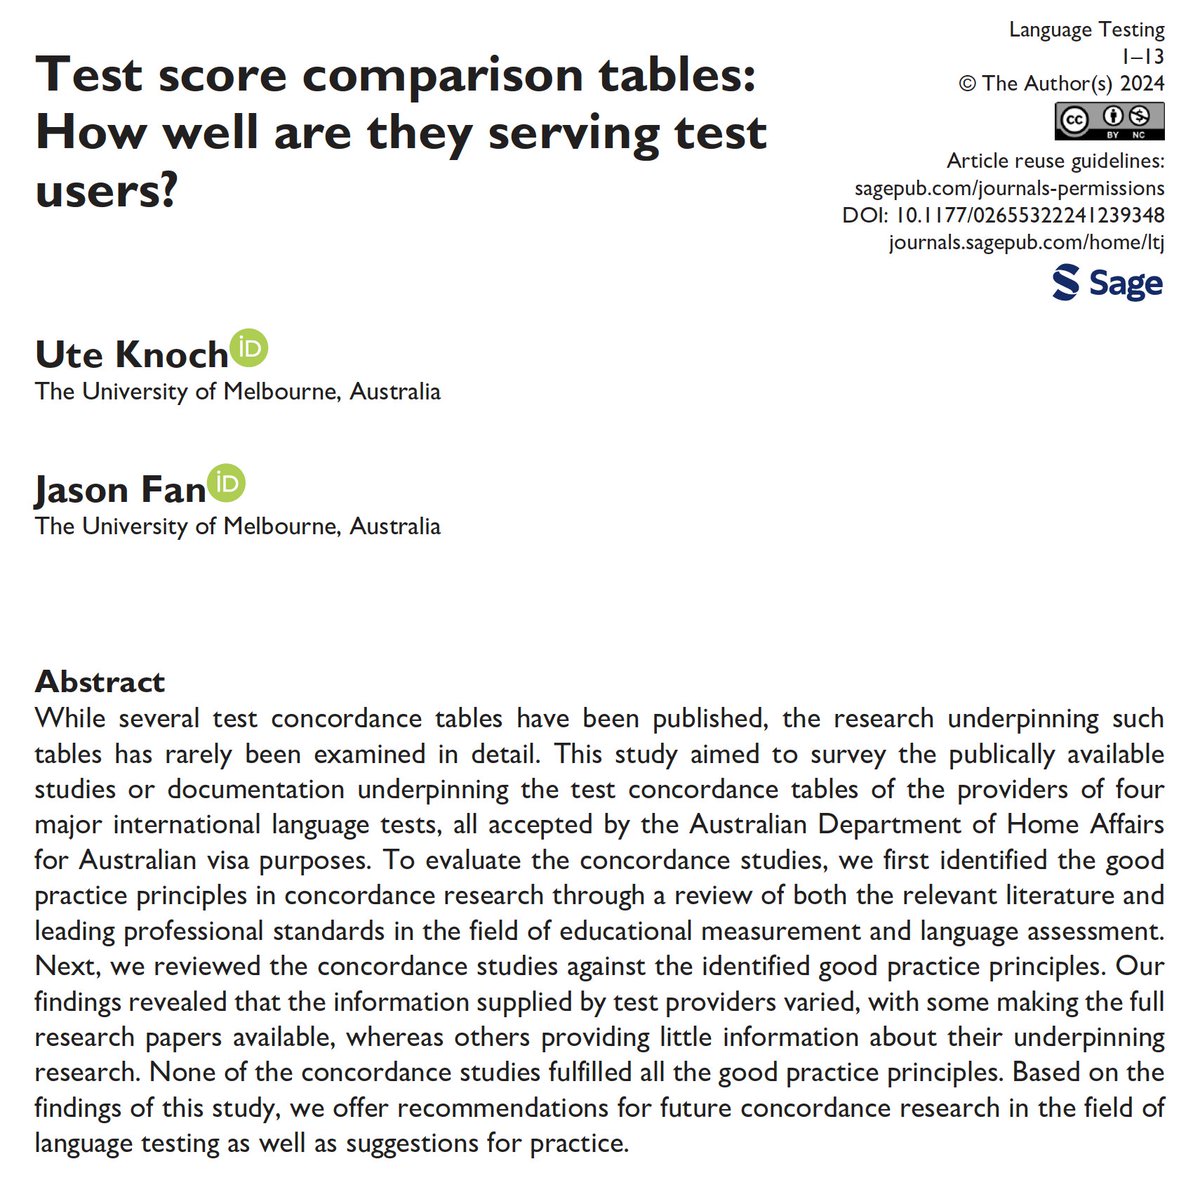 Now available in Online First, Ute Knoch (@knoch_ute ) and Jason Fan (at @UniMelb ) evaluate the concordance practices of language test providers based on concordance studies focusing on four large-scale English language tests. journals.sagepub.com/doi/10.1177/02…